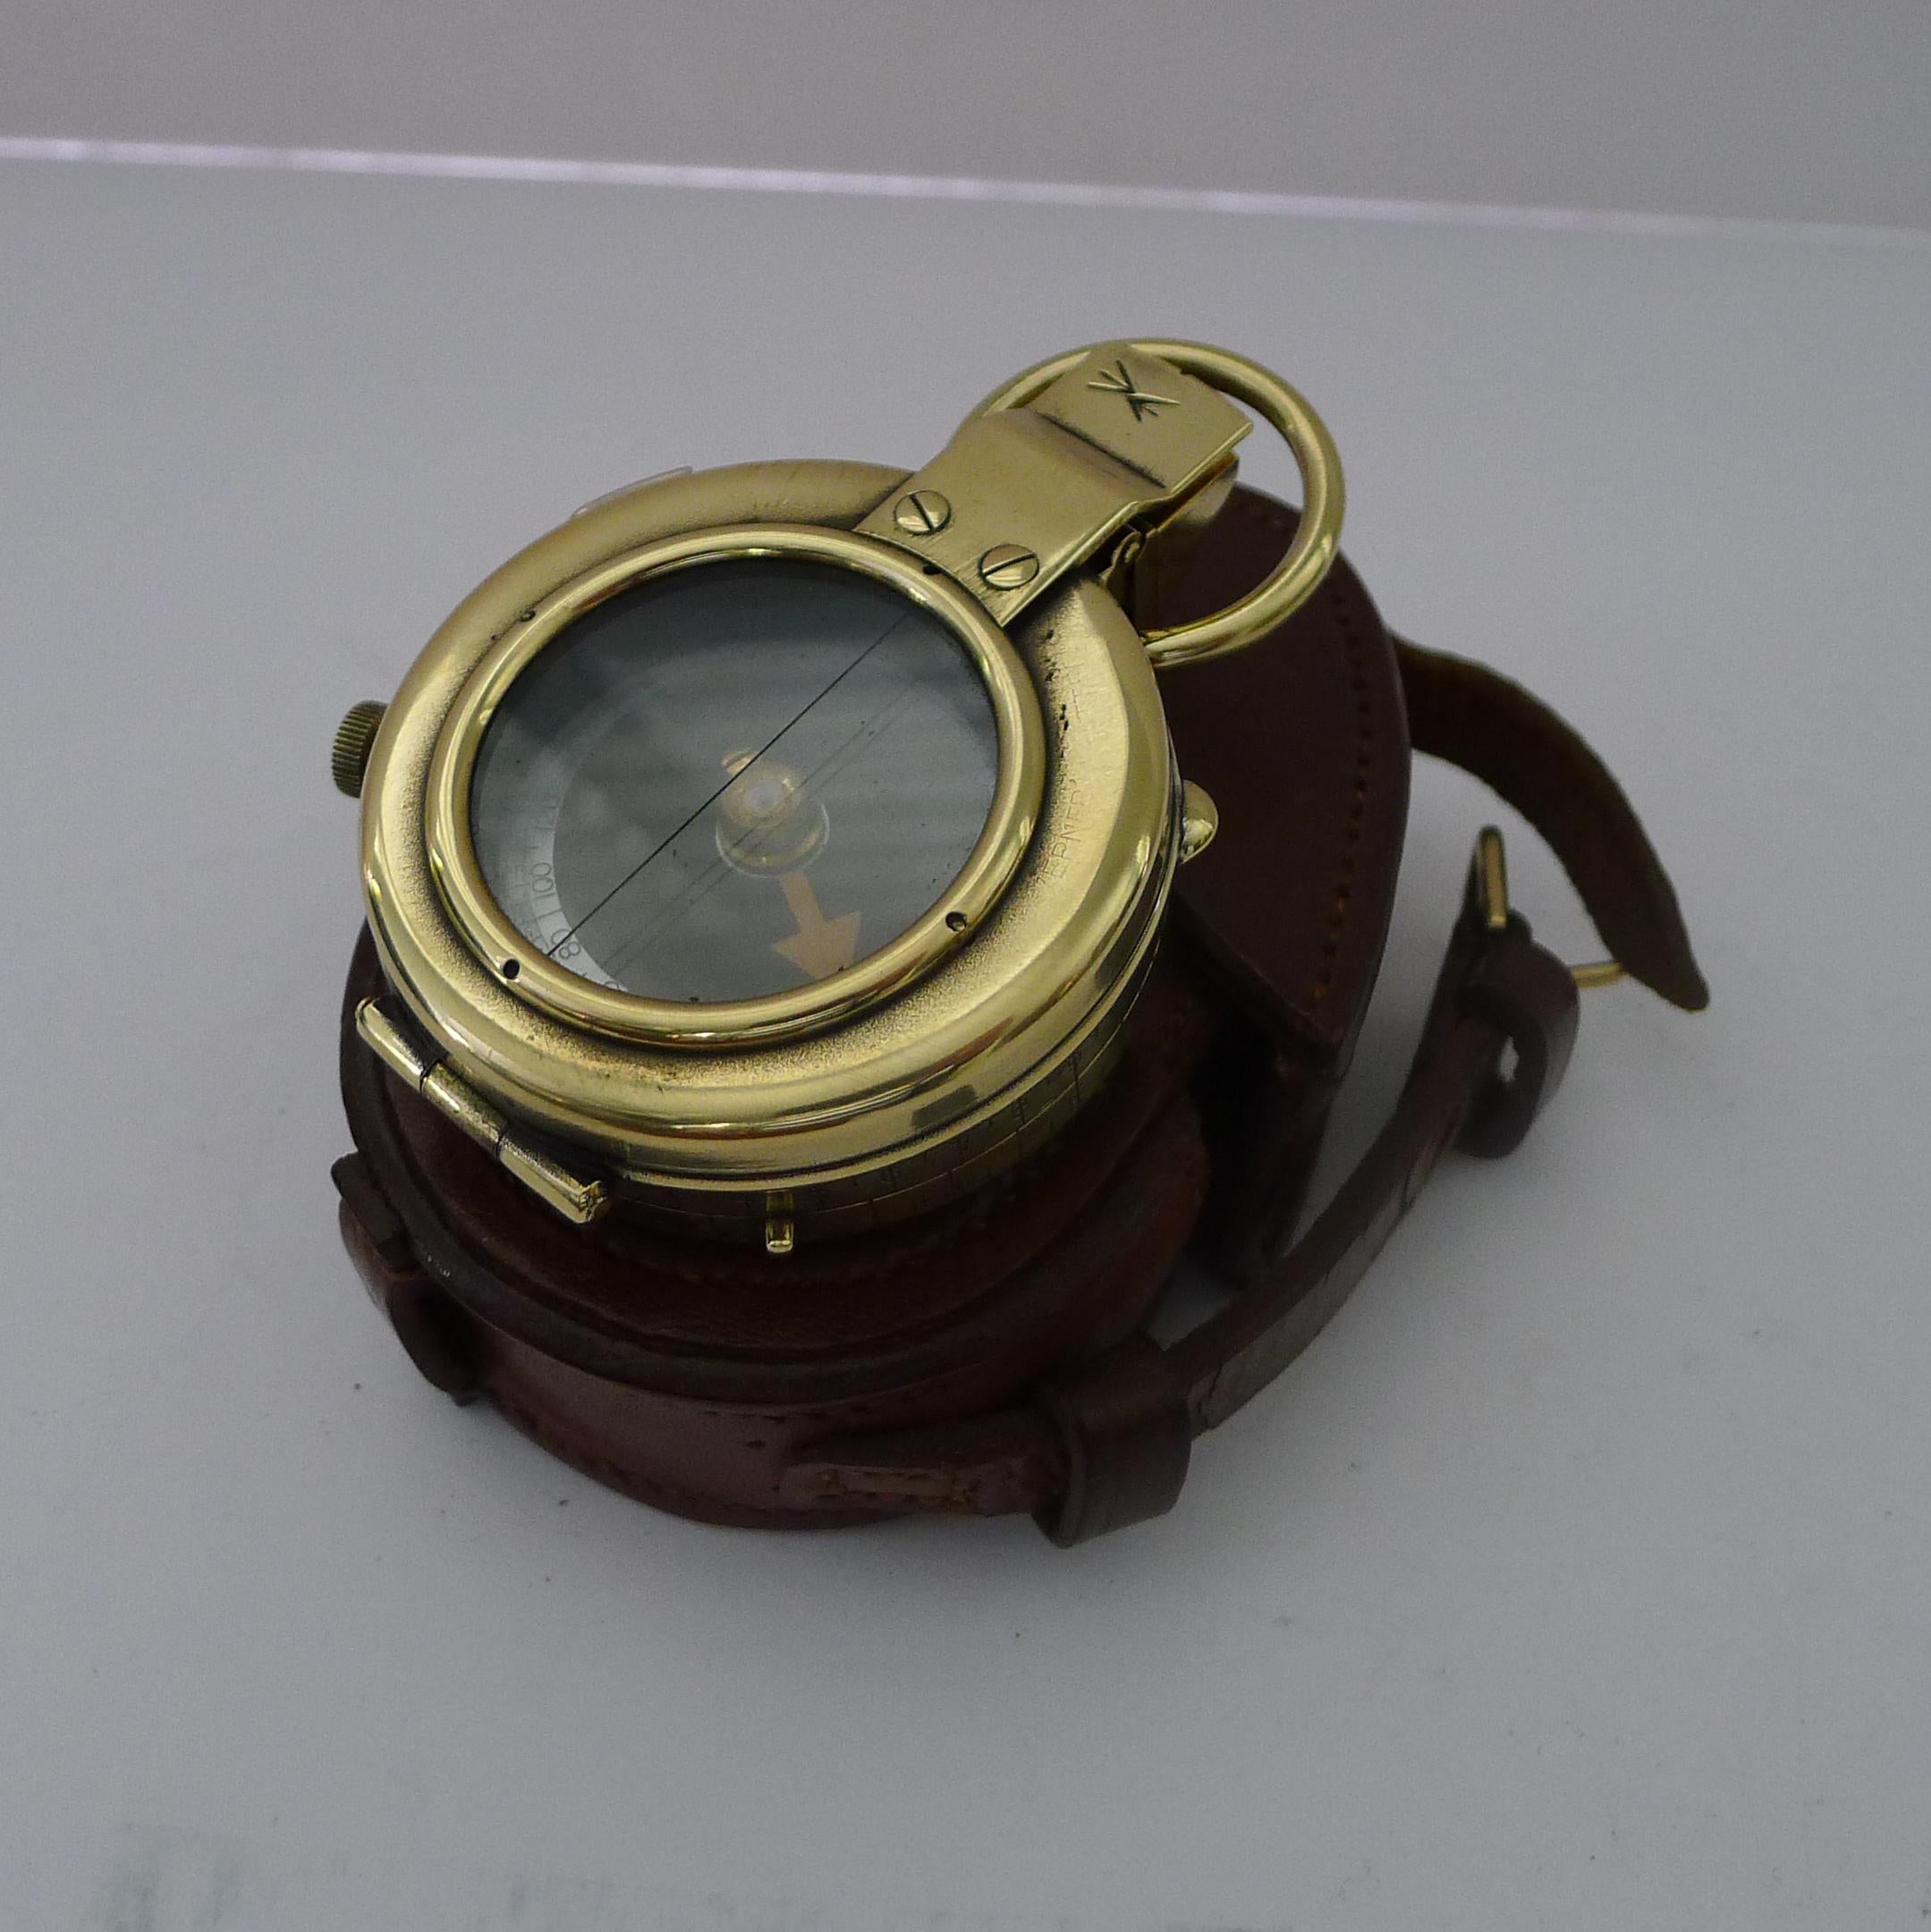 WW1 1917 British Army Officer's Compass, Verner's Patent MK VIII by French Ltd 3